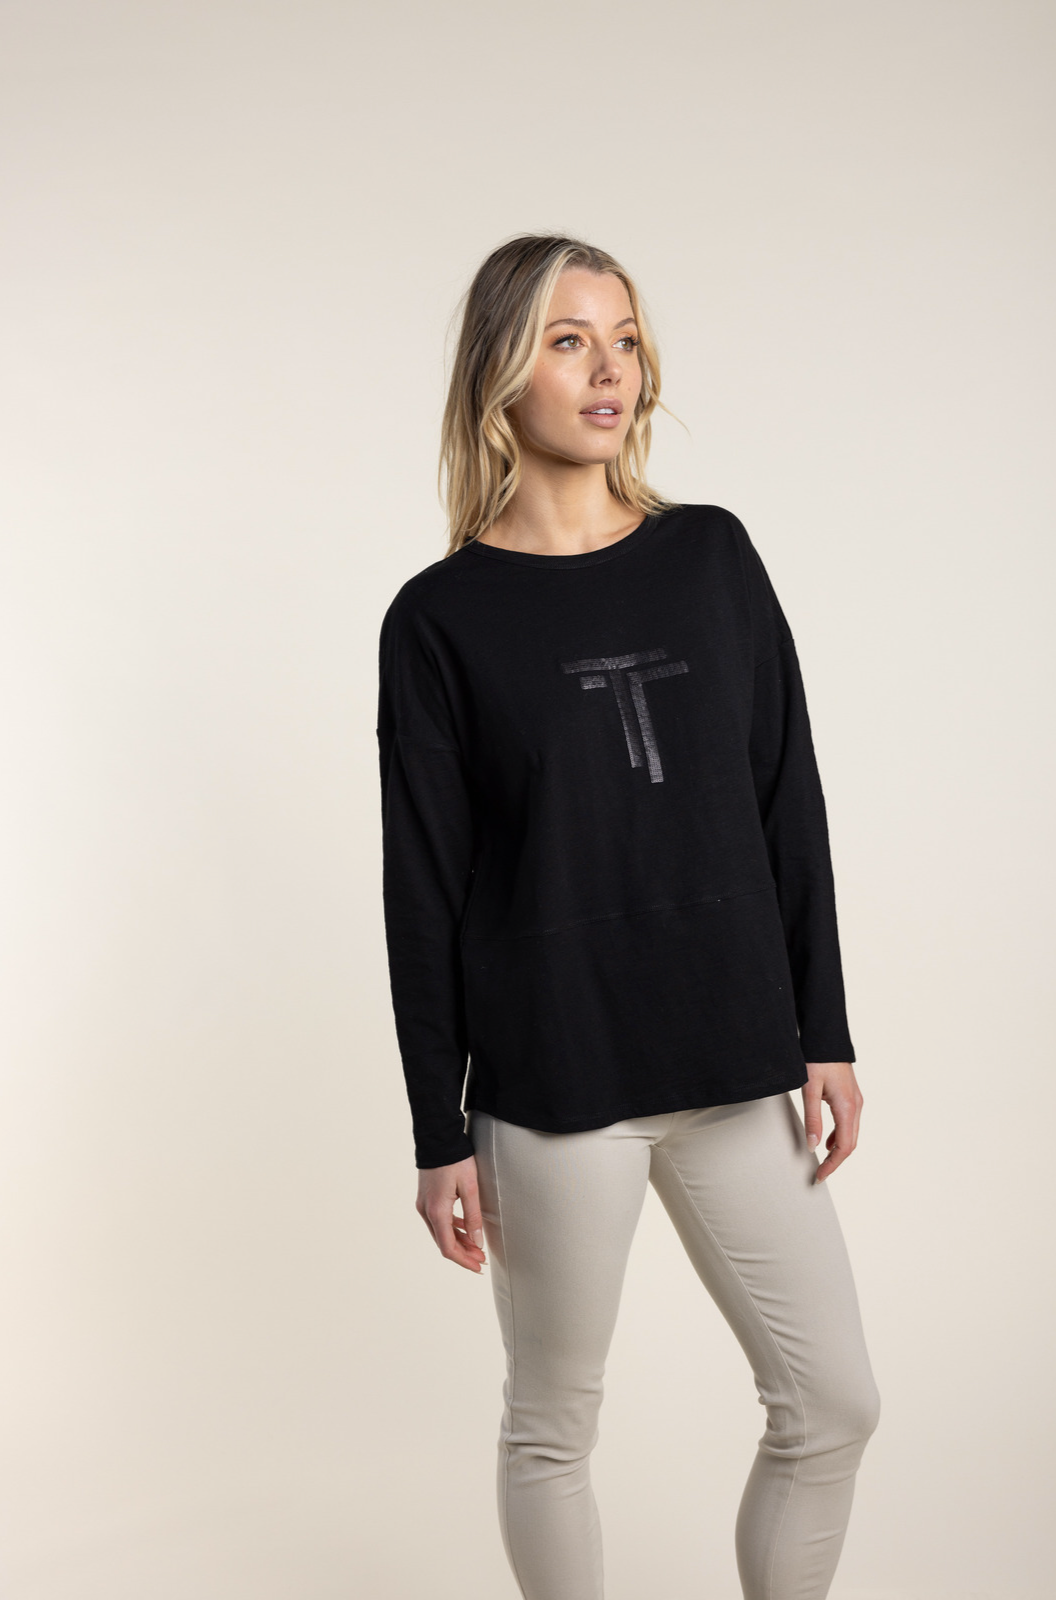 Two T's Sequin Trim Logo Tee in Black